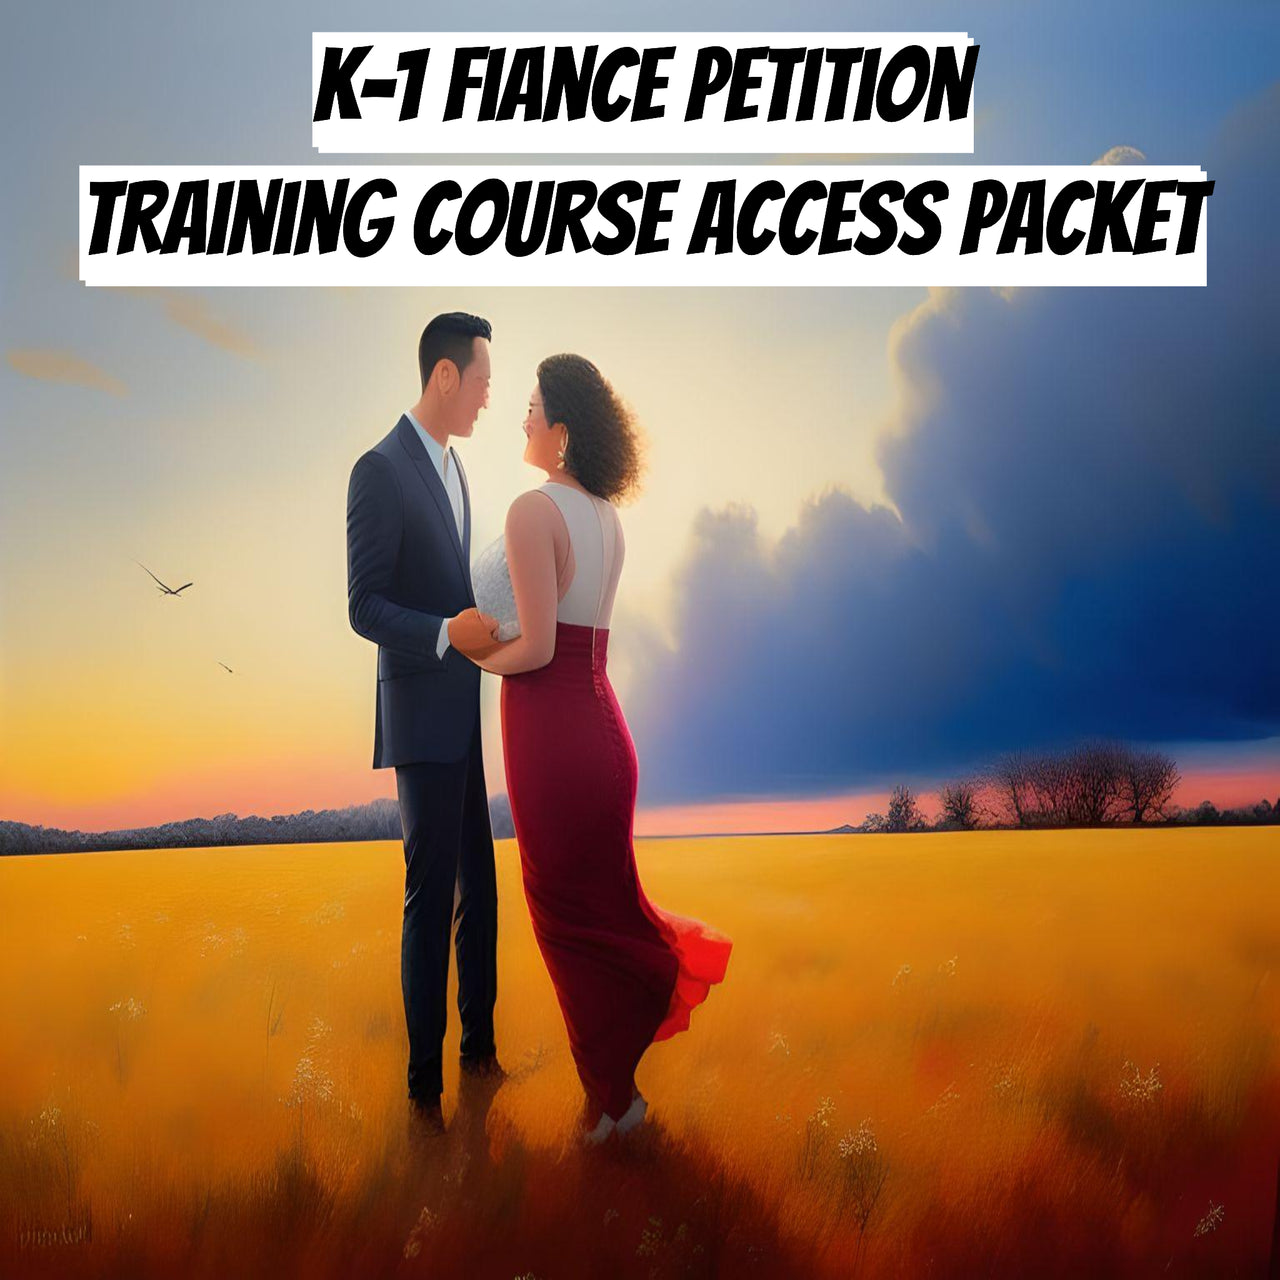 K-1 Fiancee Petition Visa Training Course Access Packet